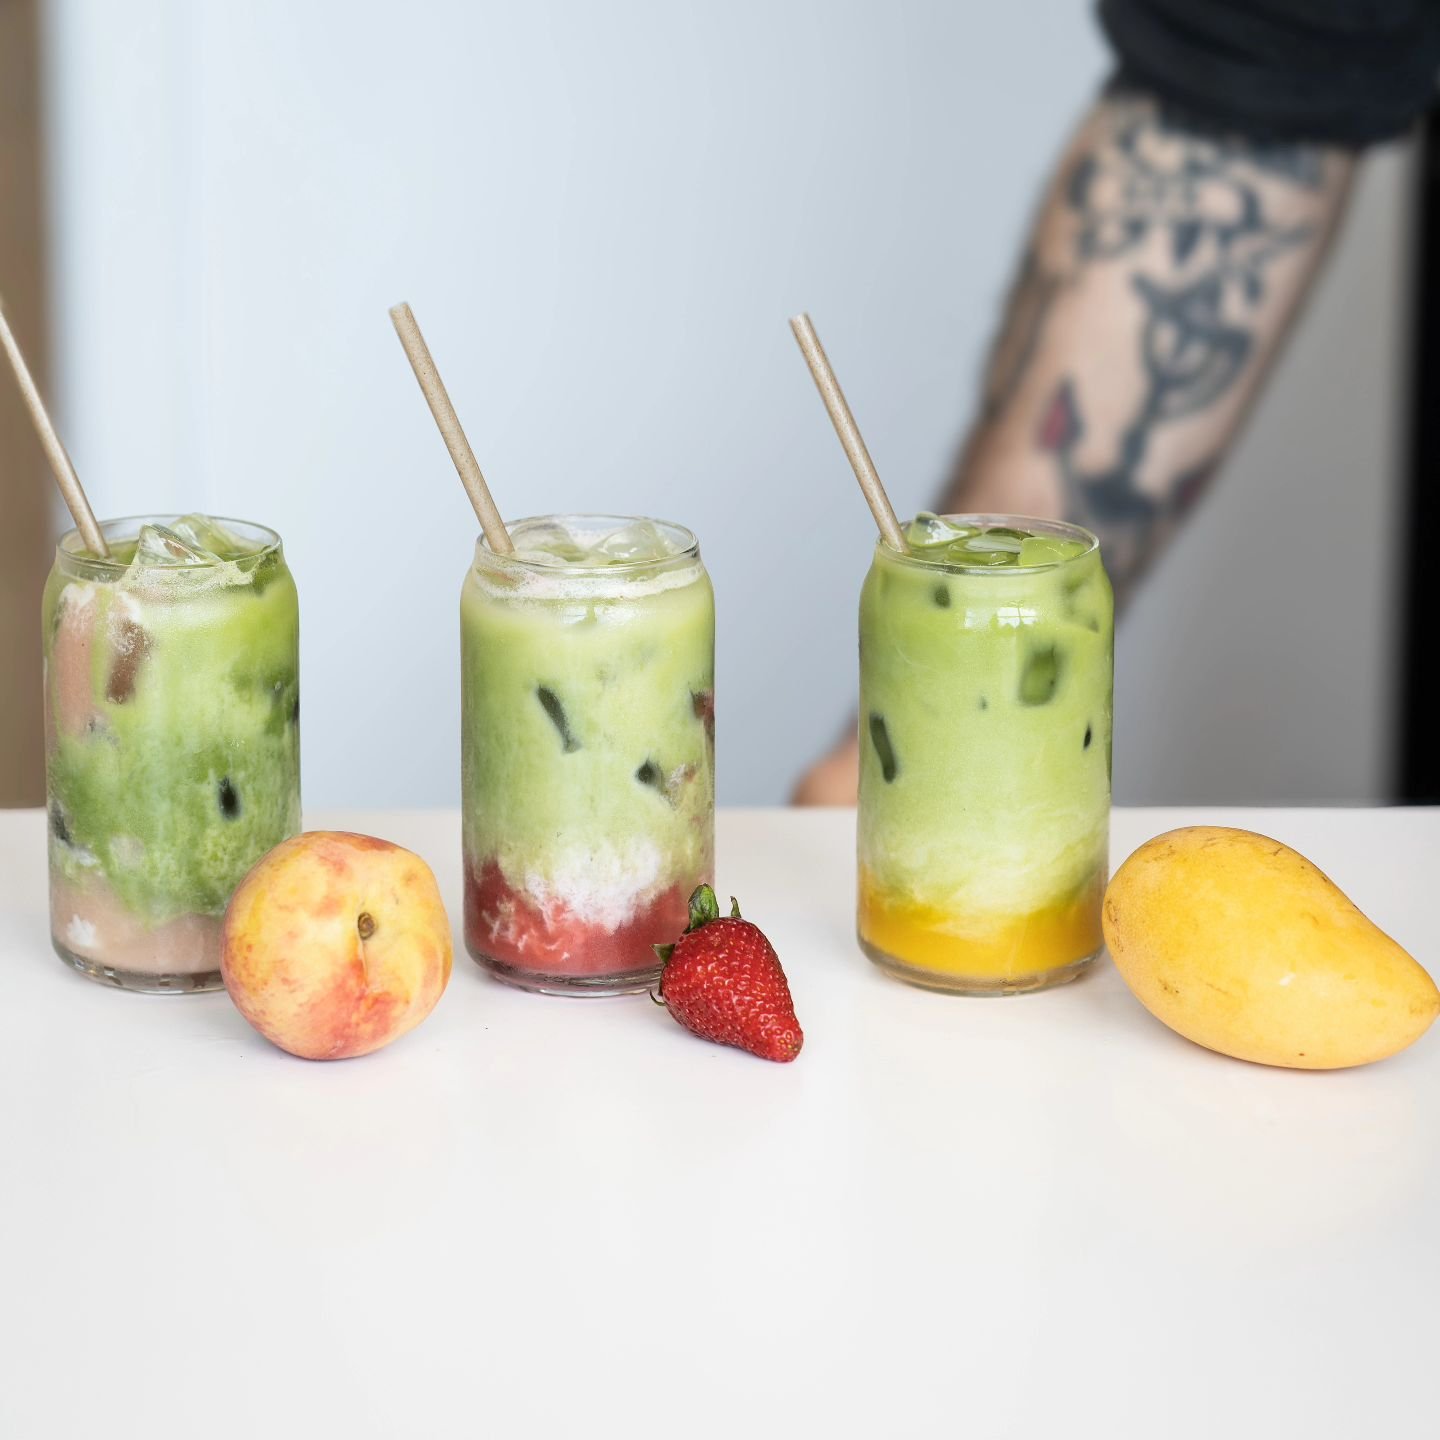 Hot days call for refreshing drinks! Come cool down with our line up of matcha drinks 🫠